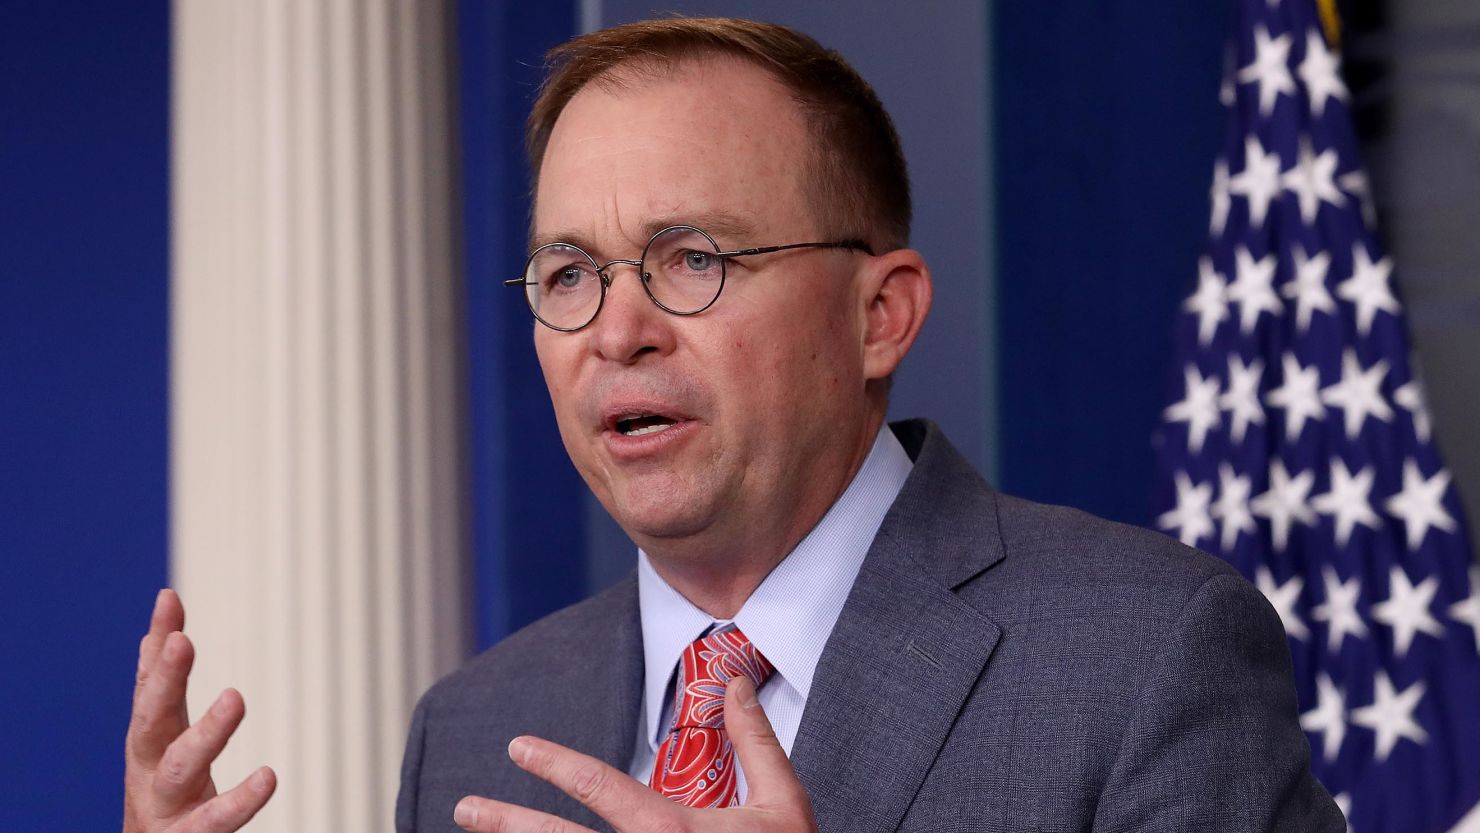 Acting White House Chief of Staff Mick Mulvaney answers questions during a briefing at the White House on October 17, 2019.